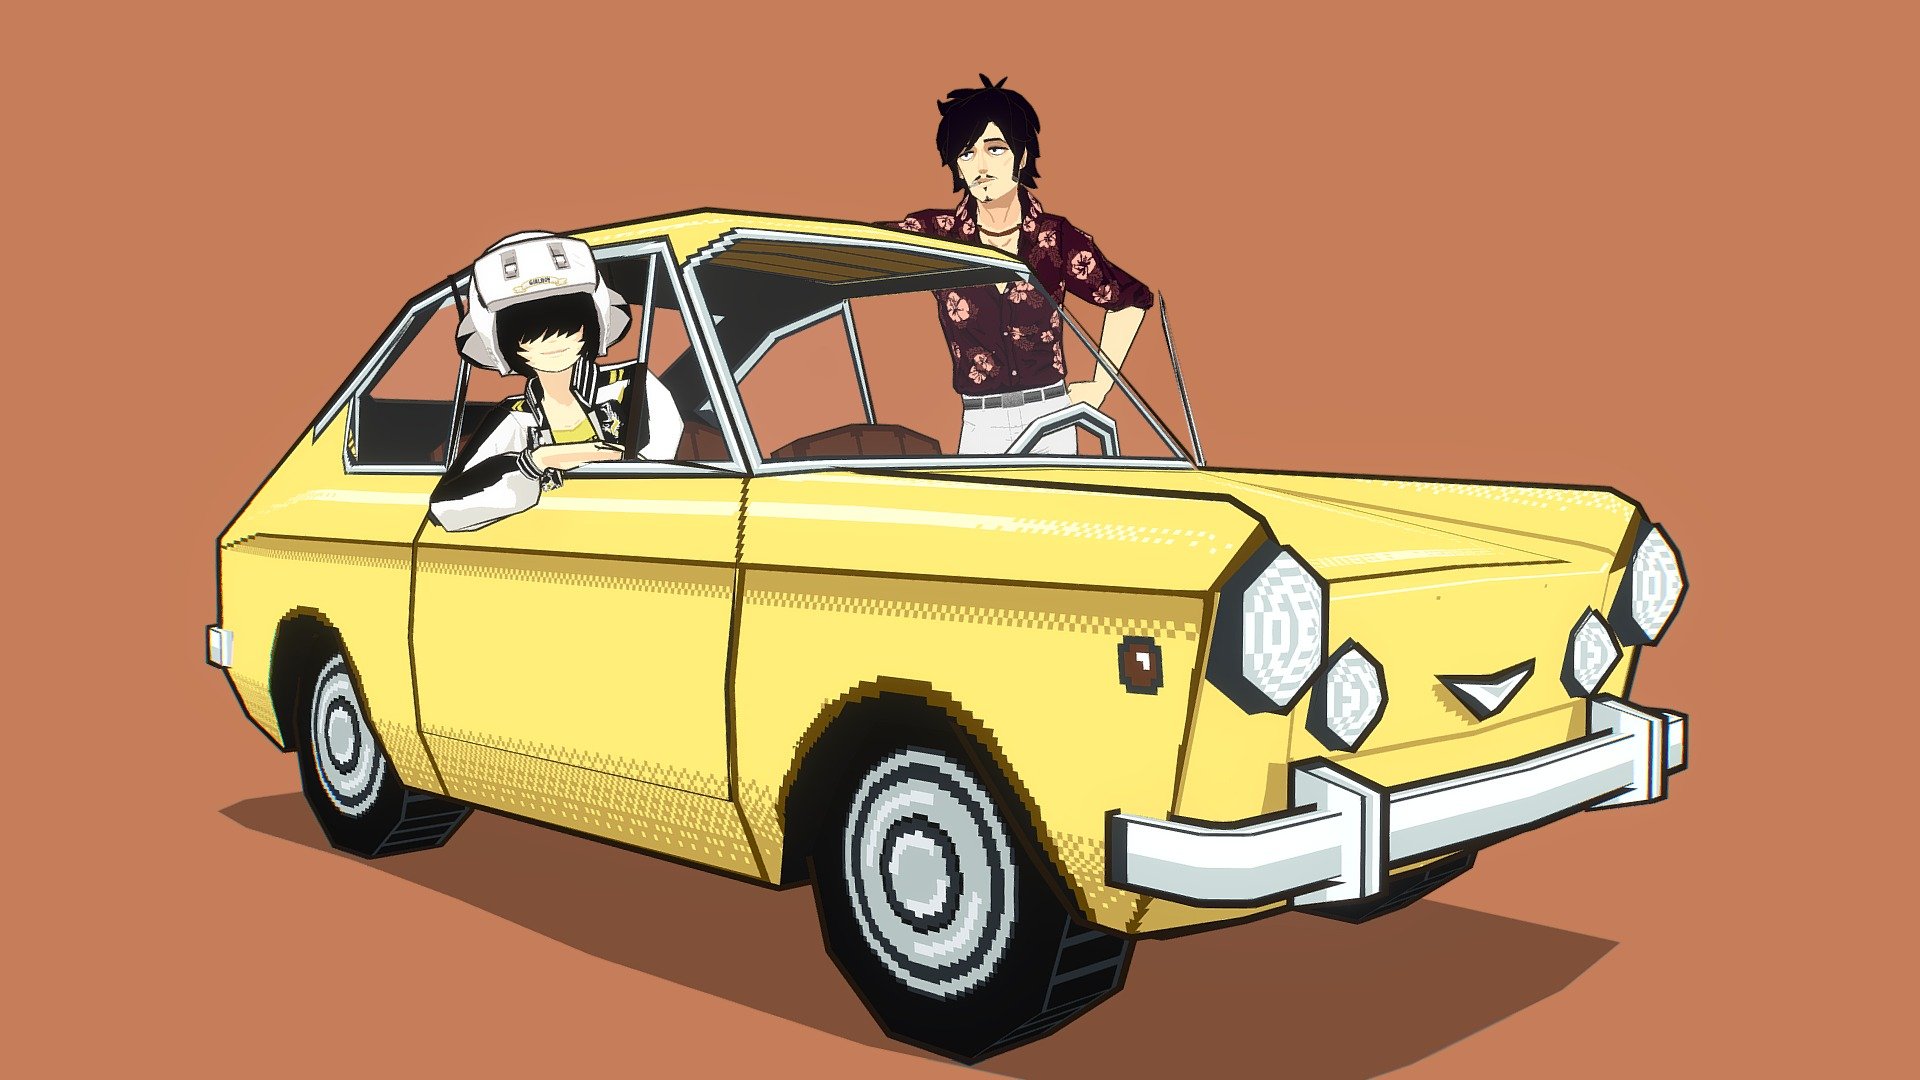 Quite Lupintic! This Fiat 850 Coupe is the first proper vehicle I've modeled. Bit of a break from just character modelling.
The two characters in the car are my original characters Kazumi and Equardo. I haven't bothered to make individual posts just for them but maybe one day 3d model